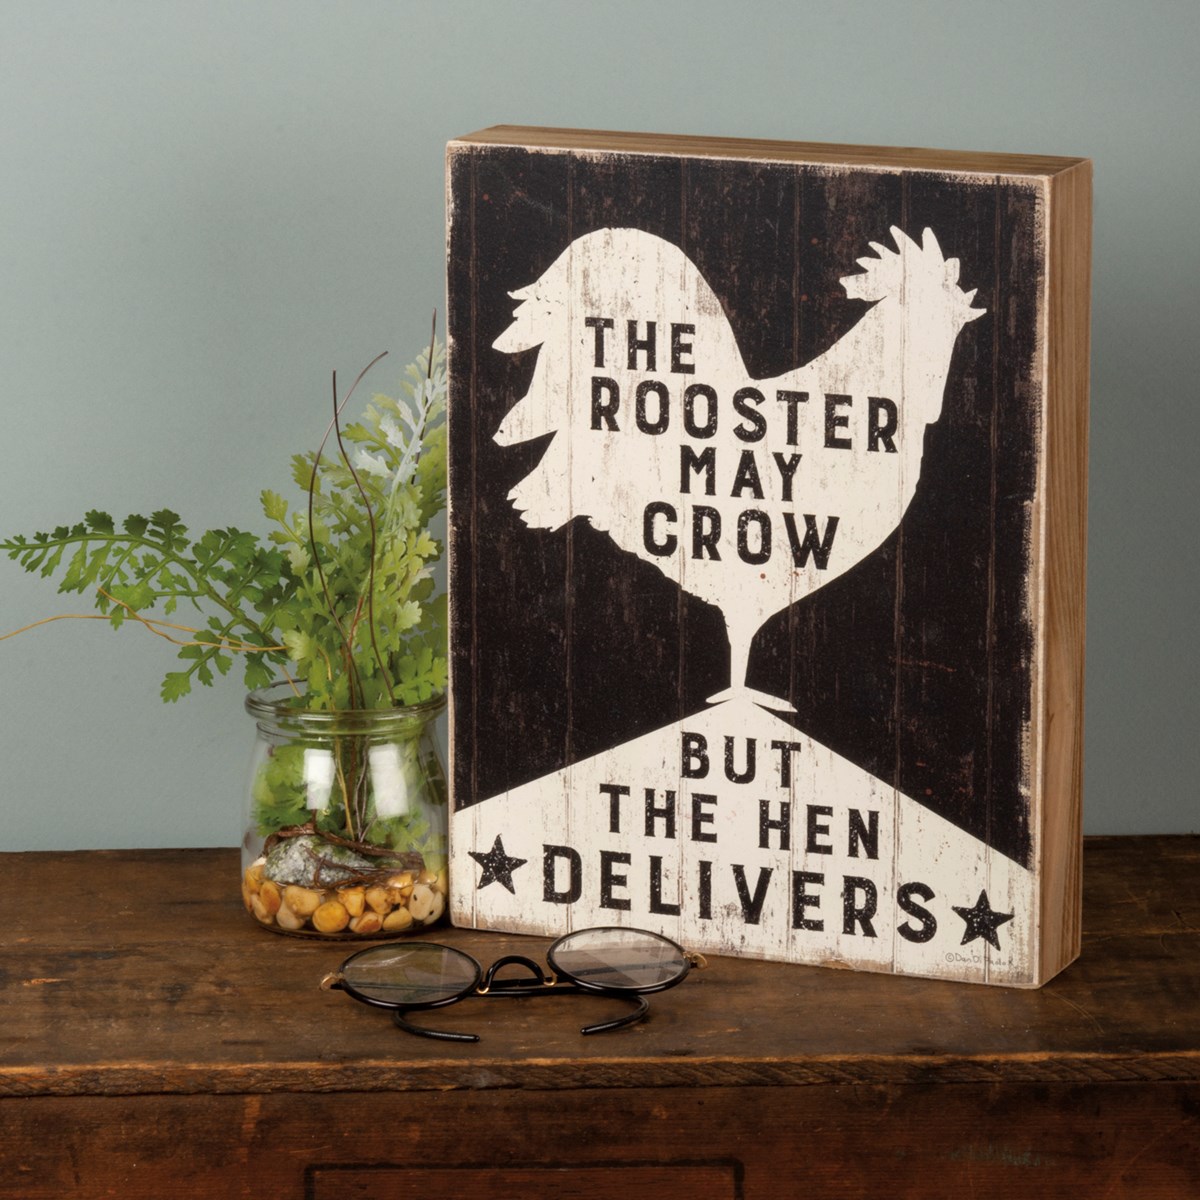 Rooster May Crow, But Hen Delivers Box Sign - Wood, Paper